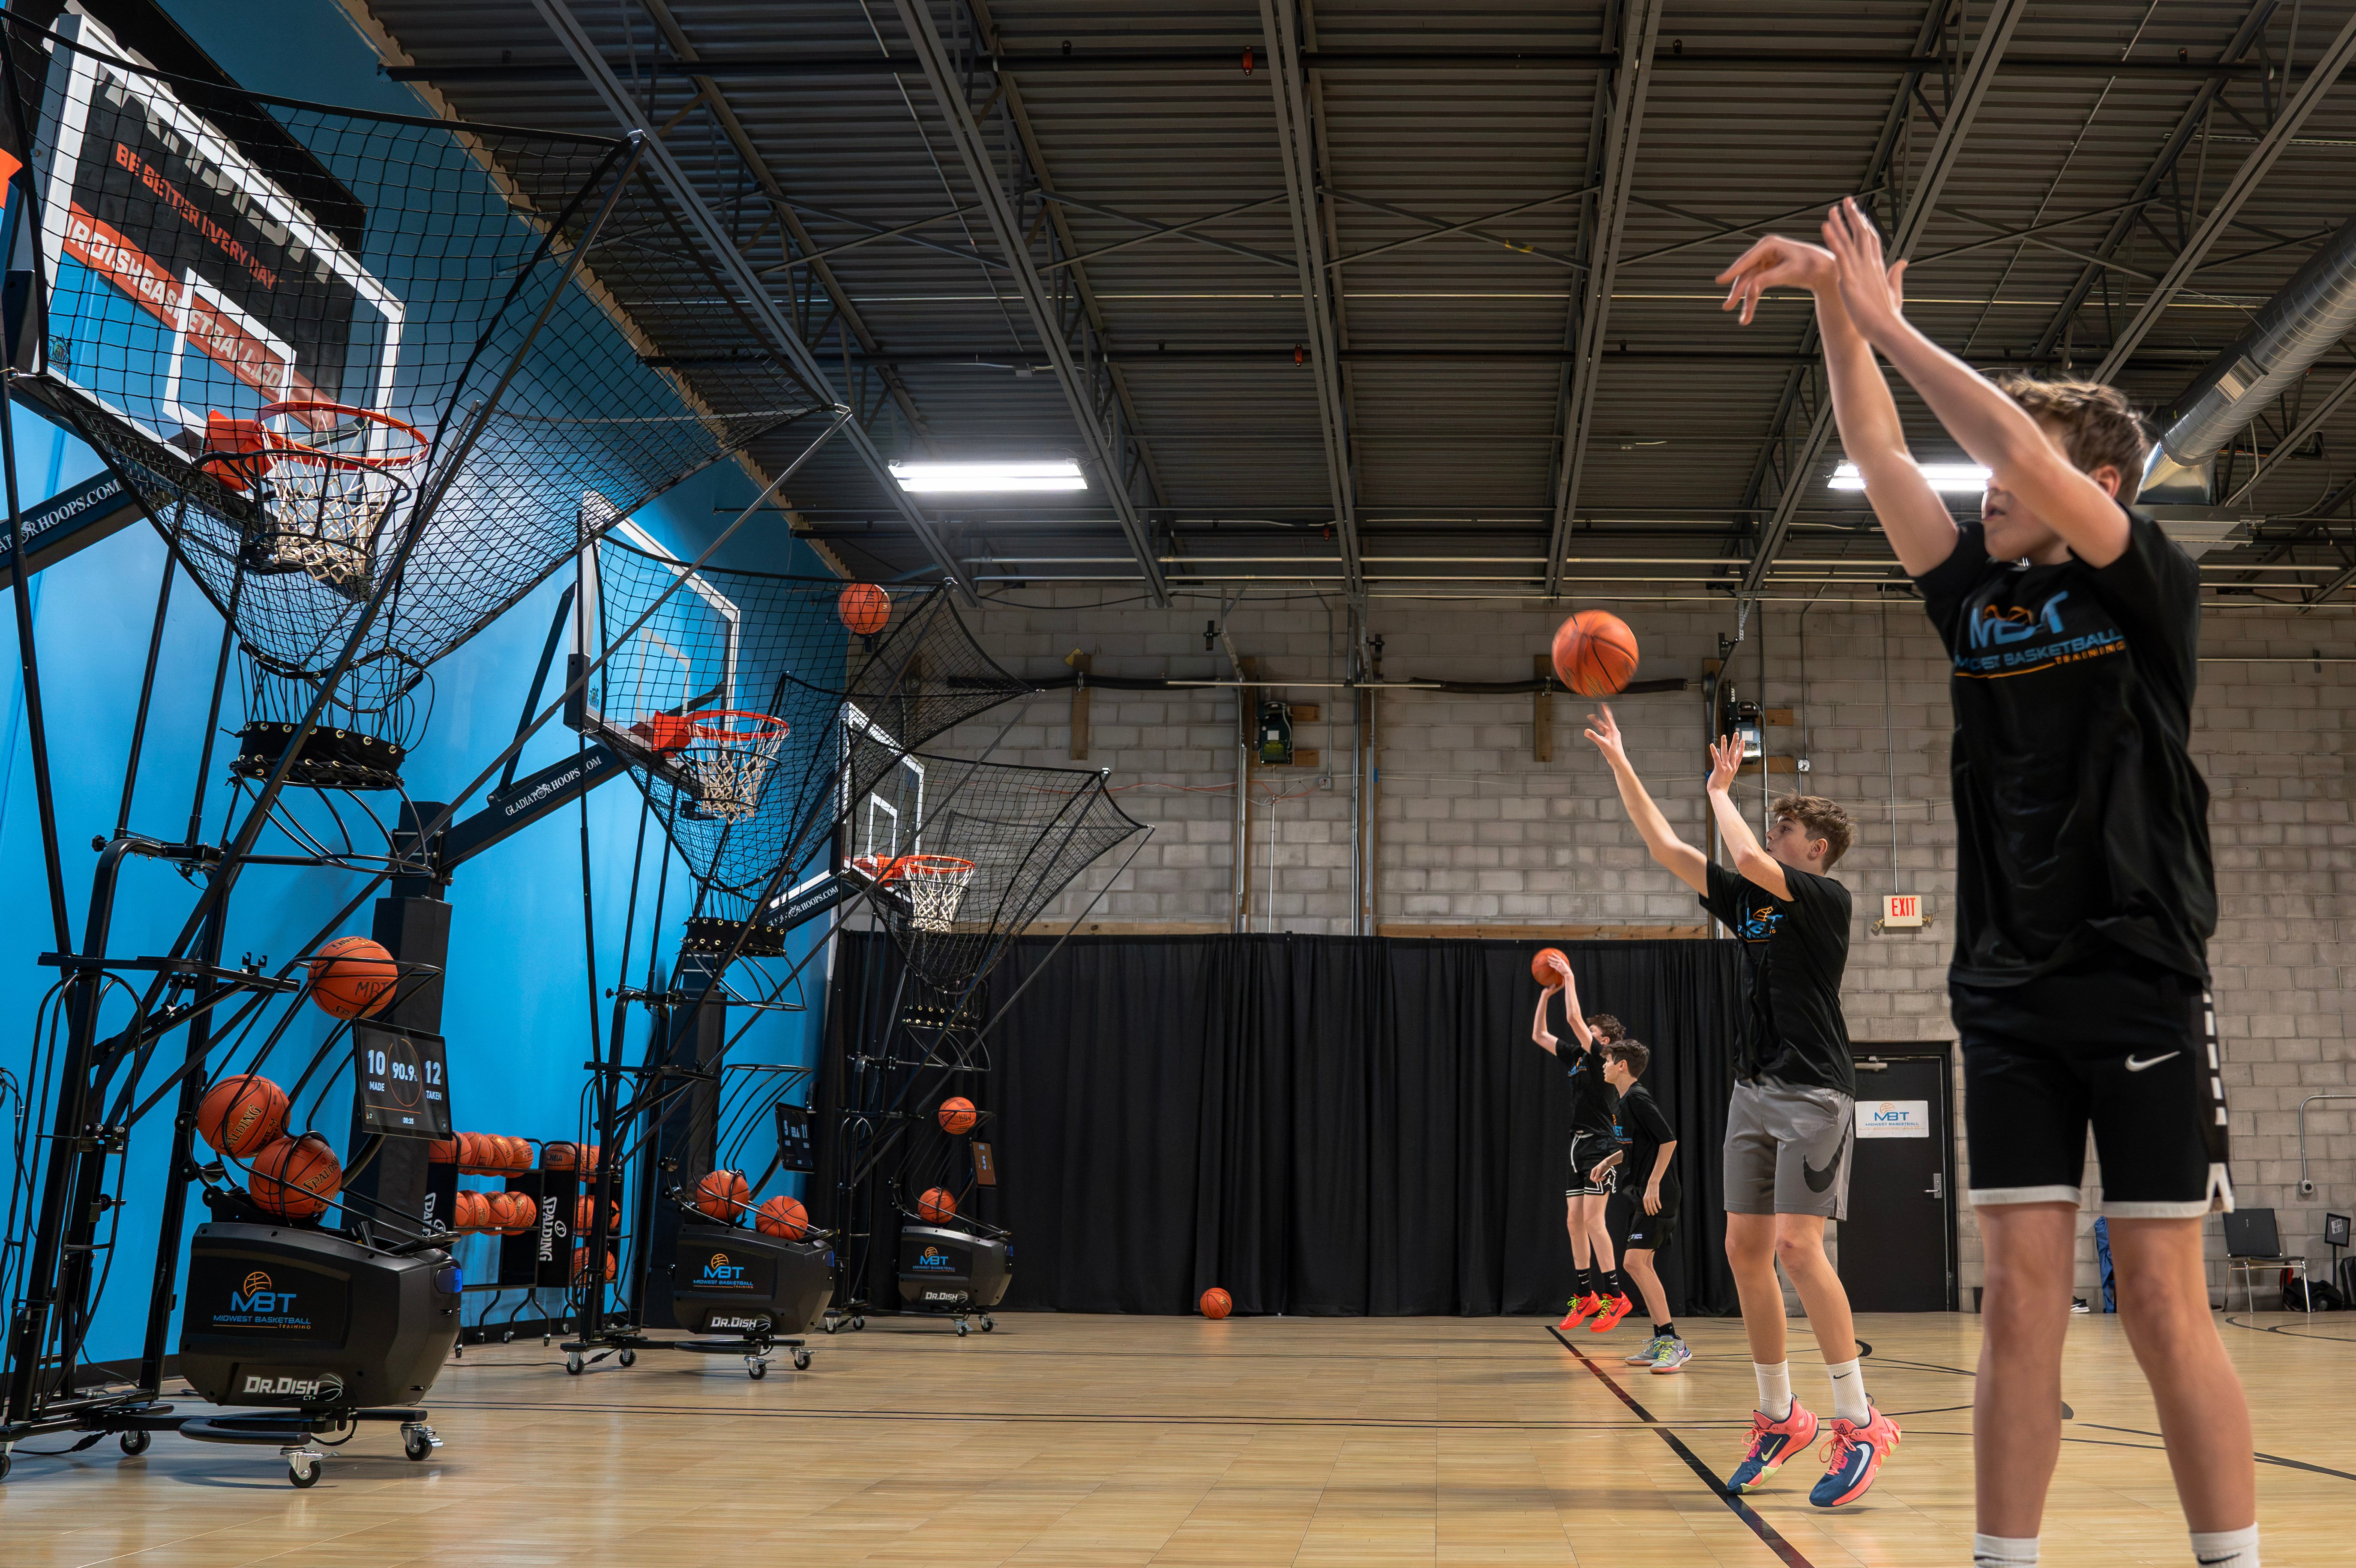 5 Ways to Maximize Traffic to Your Basketball Facility